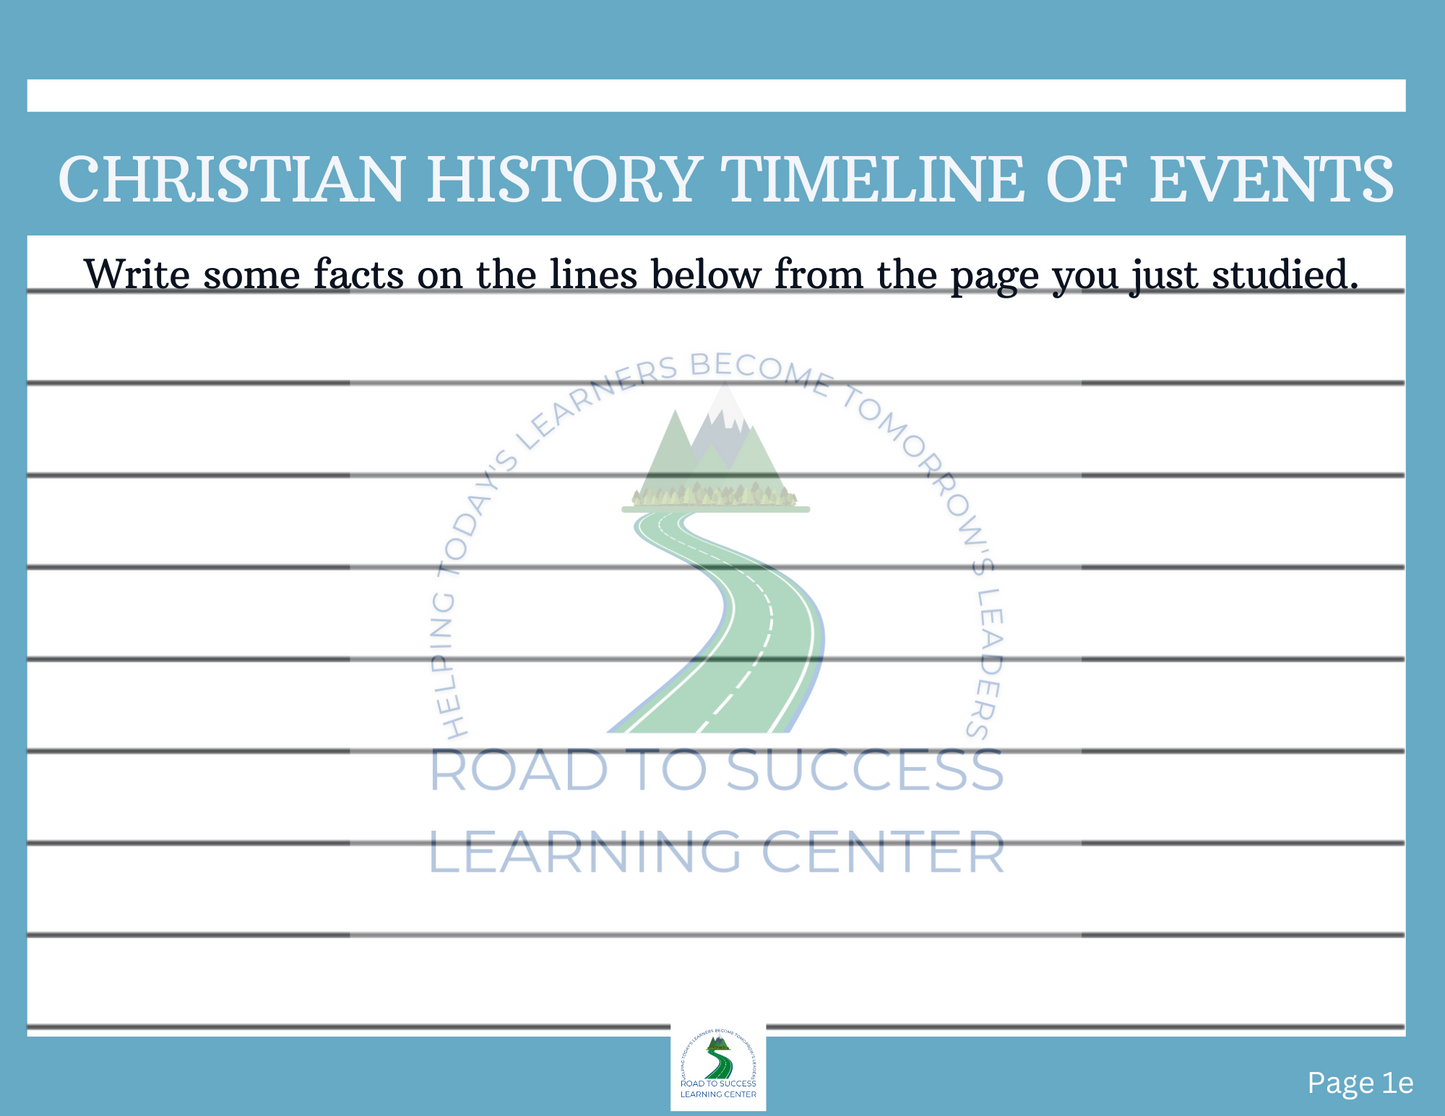 Christian History Timeline of Events